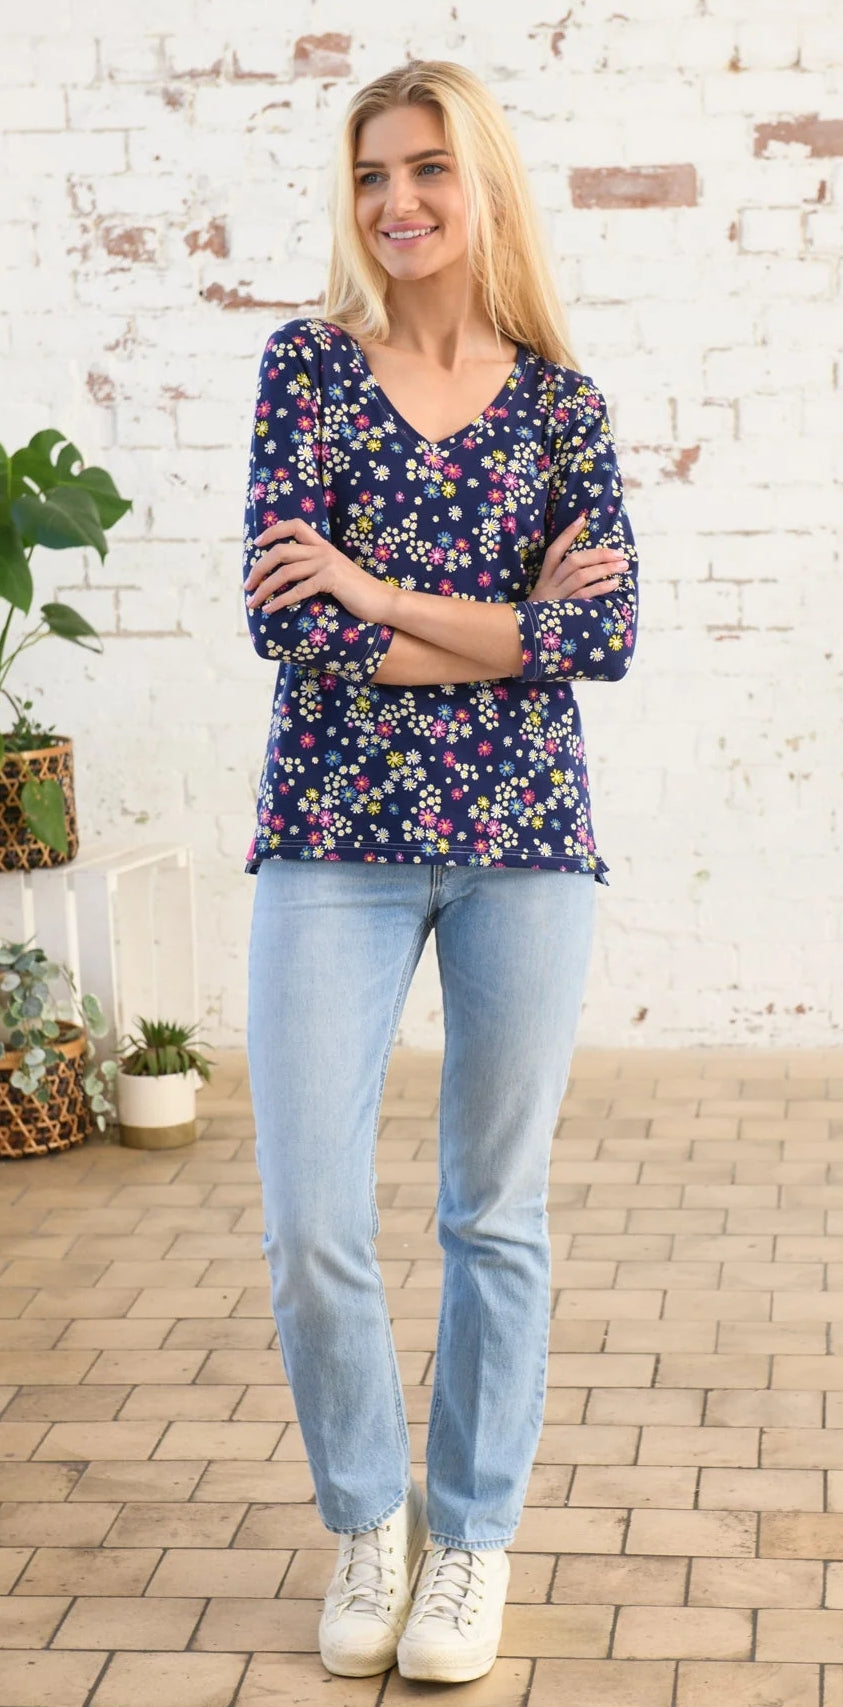 Lighthouse women's Ariana v-neck top in navy with a multicoloured floral Daisy print.